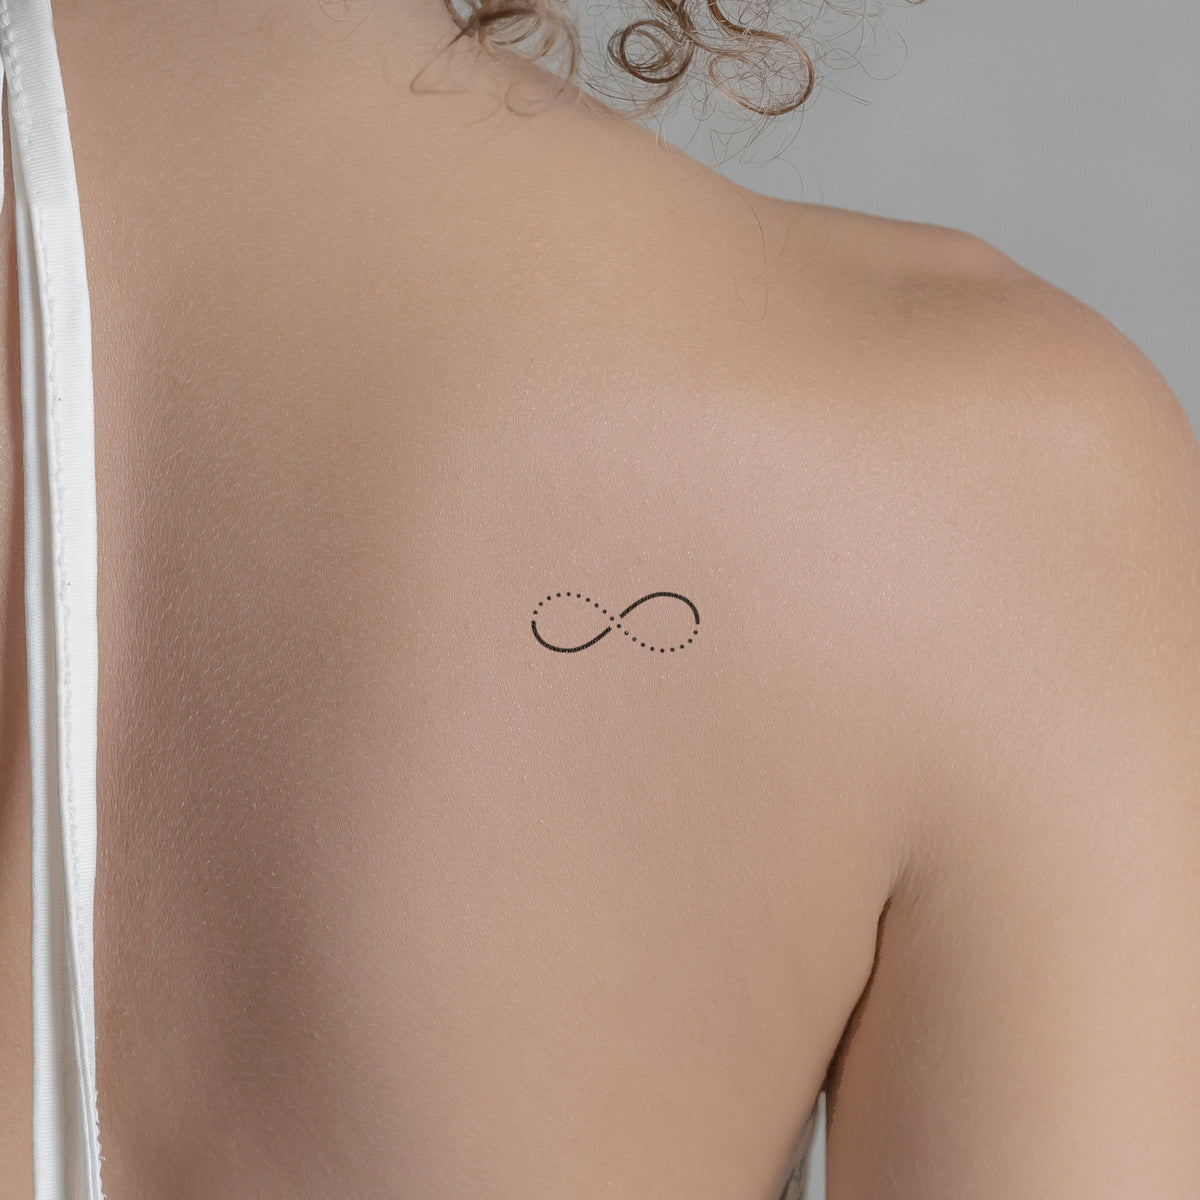 Tattoo in dubai - Small infinity symbol with name initials... | Facebook